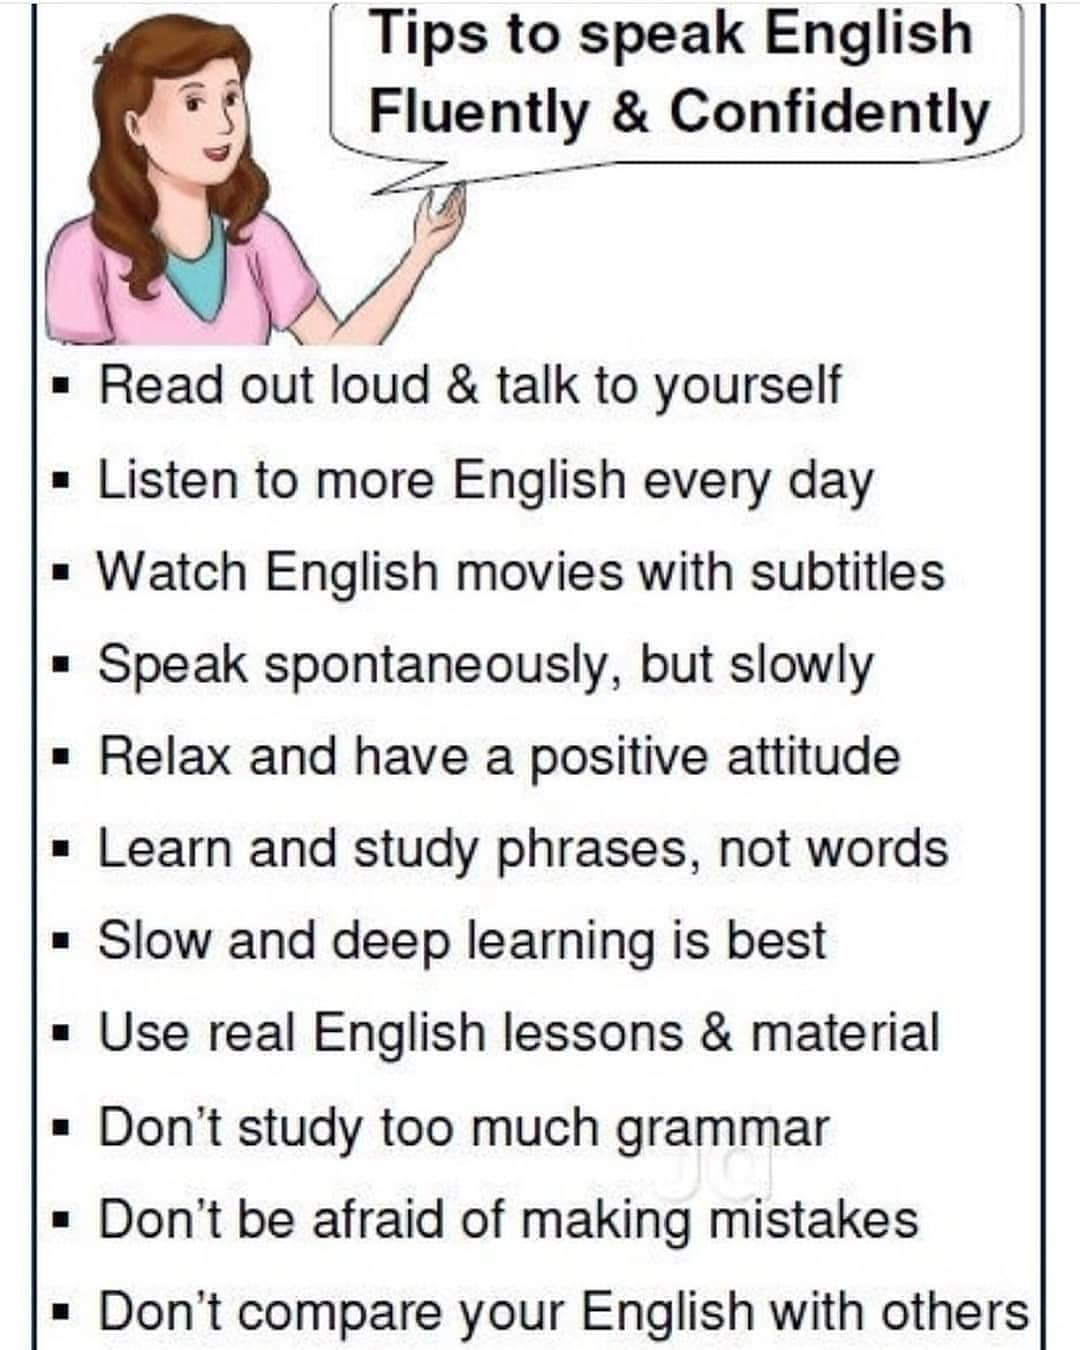 tips-to-speak-english-fluently-and-confidently